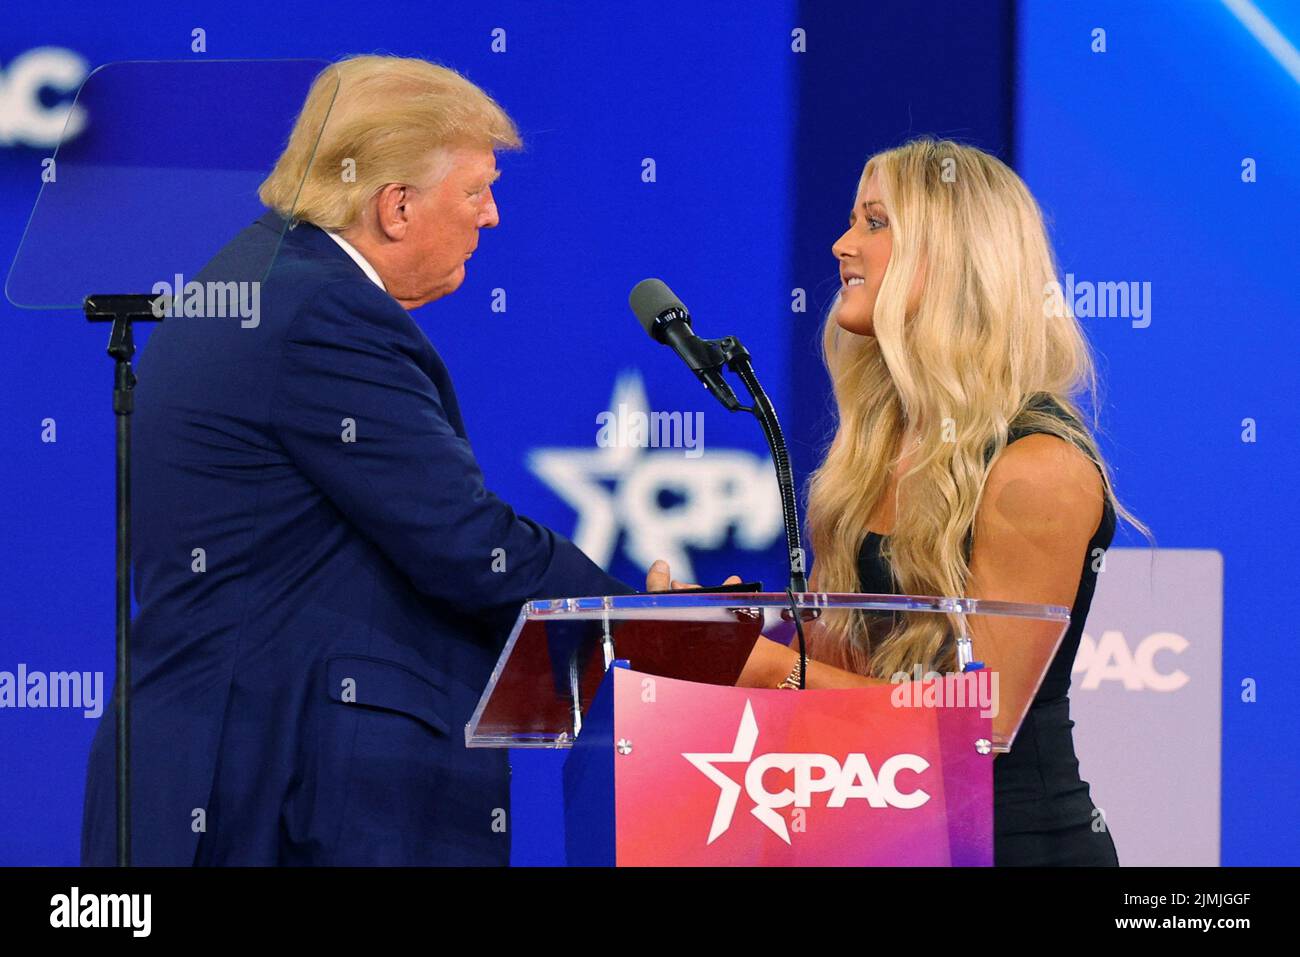 Former U.S. President Donald Trump is joined onstage by SEC champion swimmer Riley Gaines at the Conservative Political Action Conference (CPAC) in Dallas, Texas, U.S., August 6, 2022.  REUTERS/Brian Snyder Stock Photo